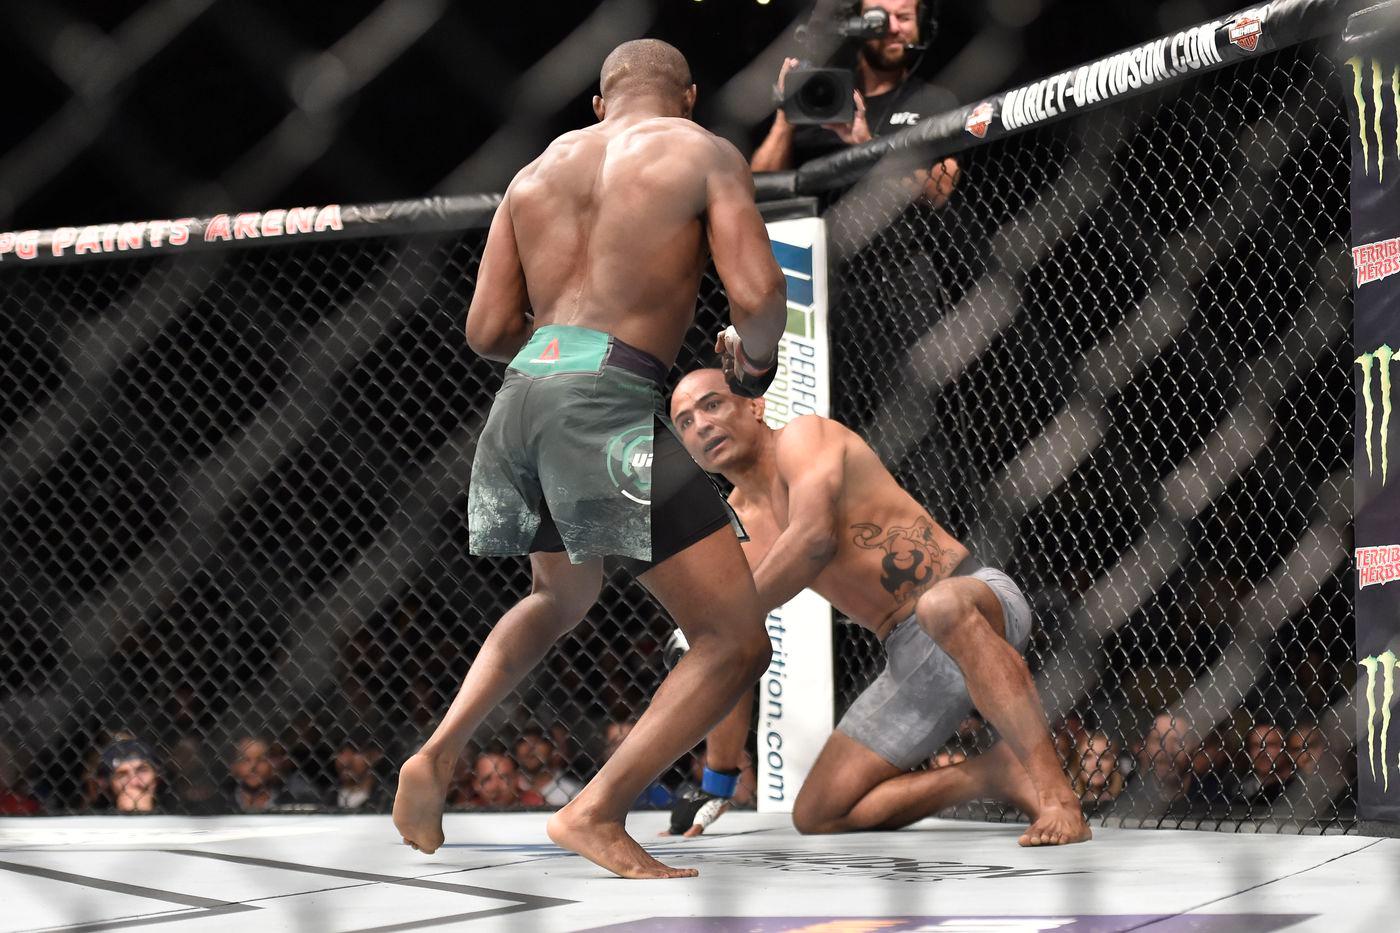 Kamaru Usman knocked out Sergio Moraes on this Fight Night card. Photo by MMA Mania.